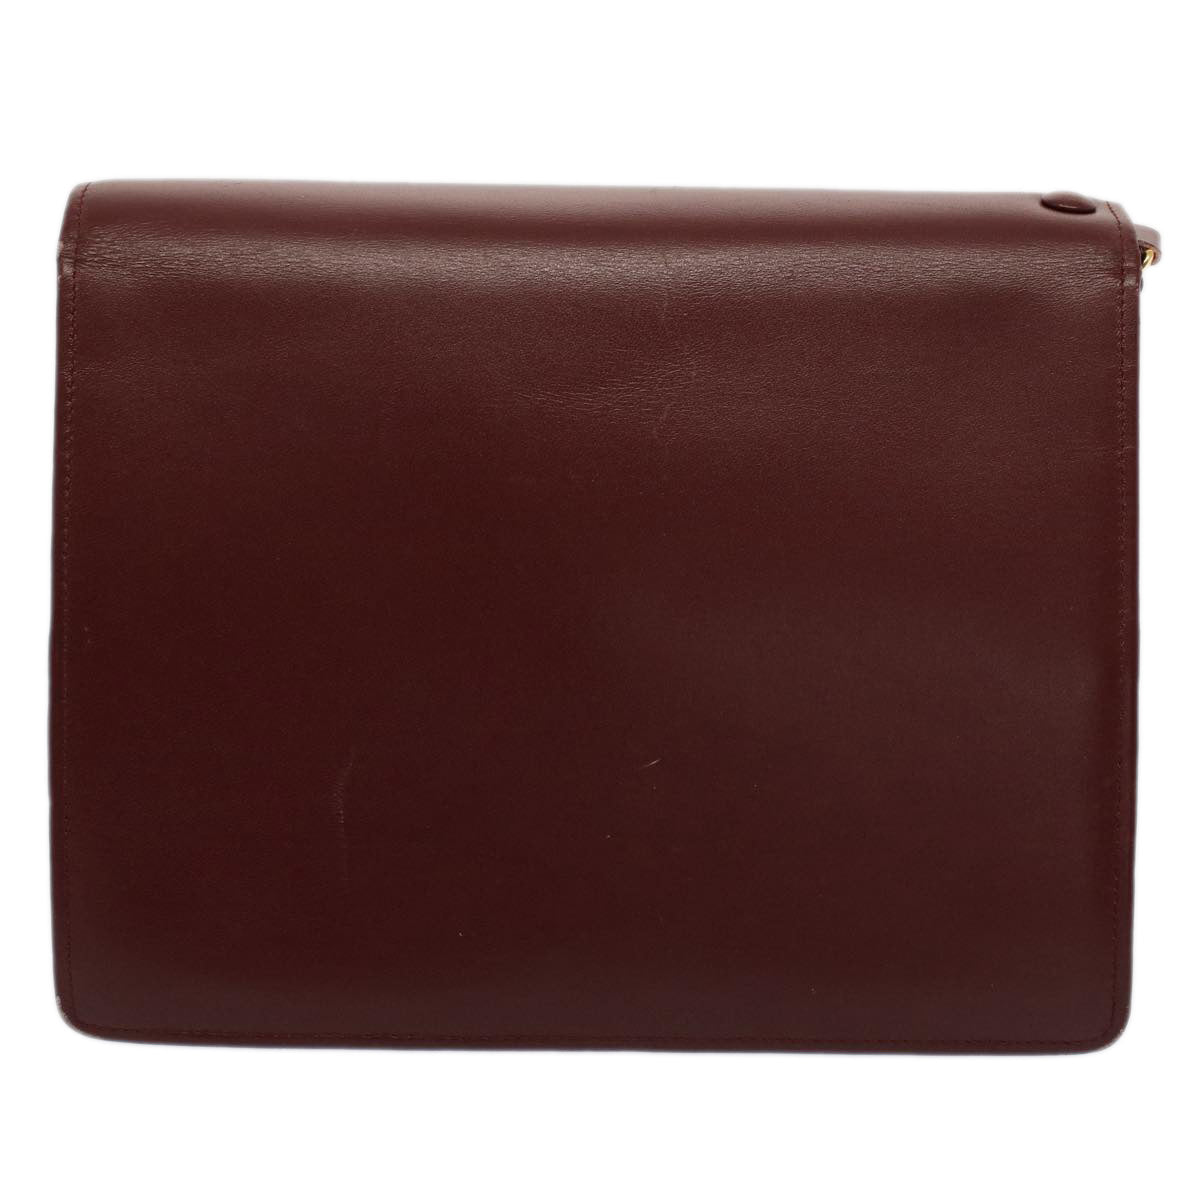 CARTIER Clutch Bag Leather Red Auth ep1696 - 0